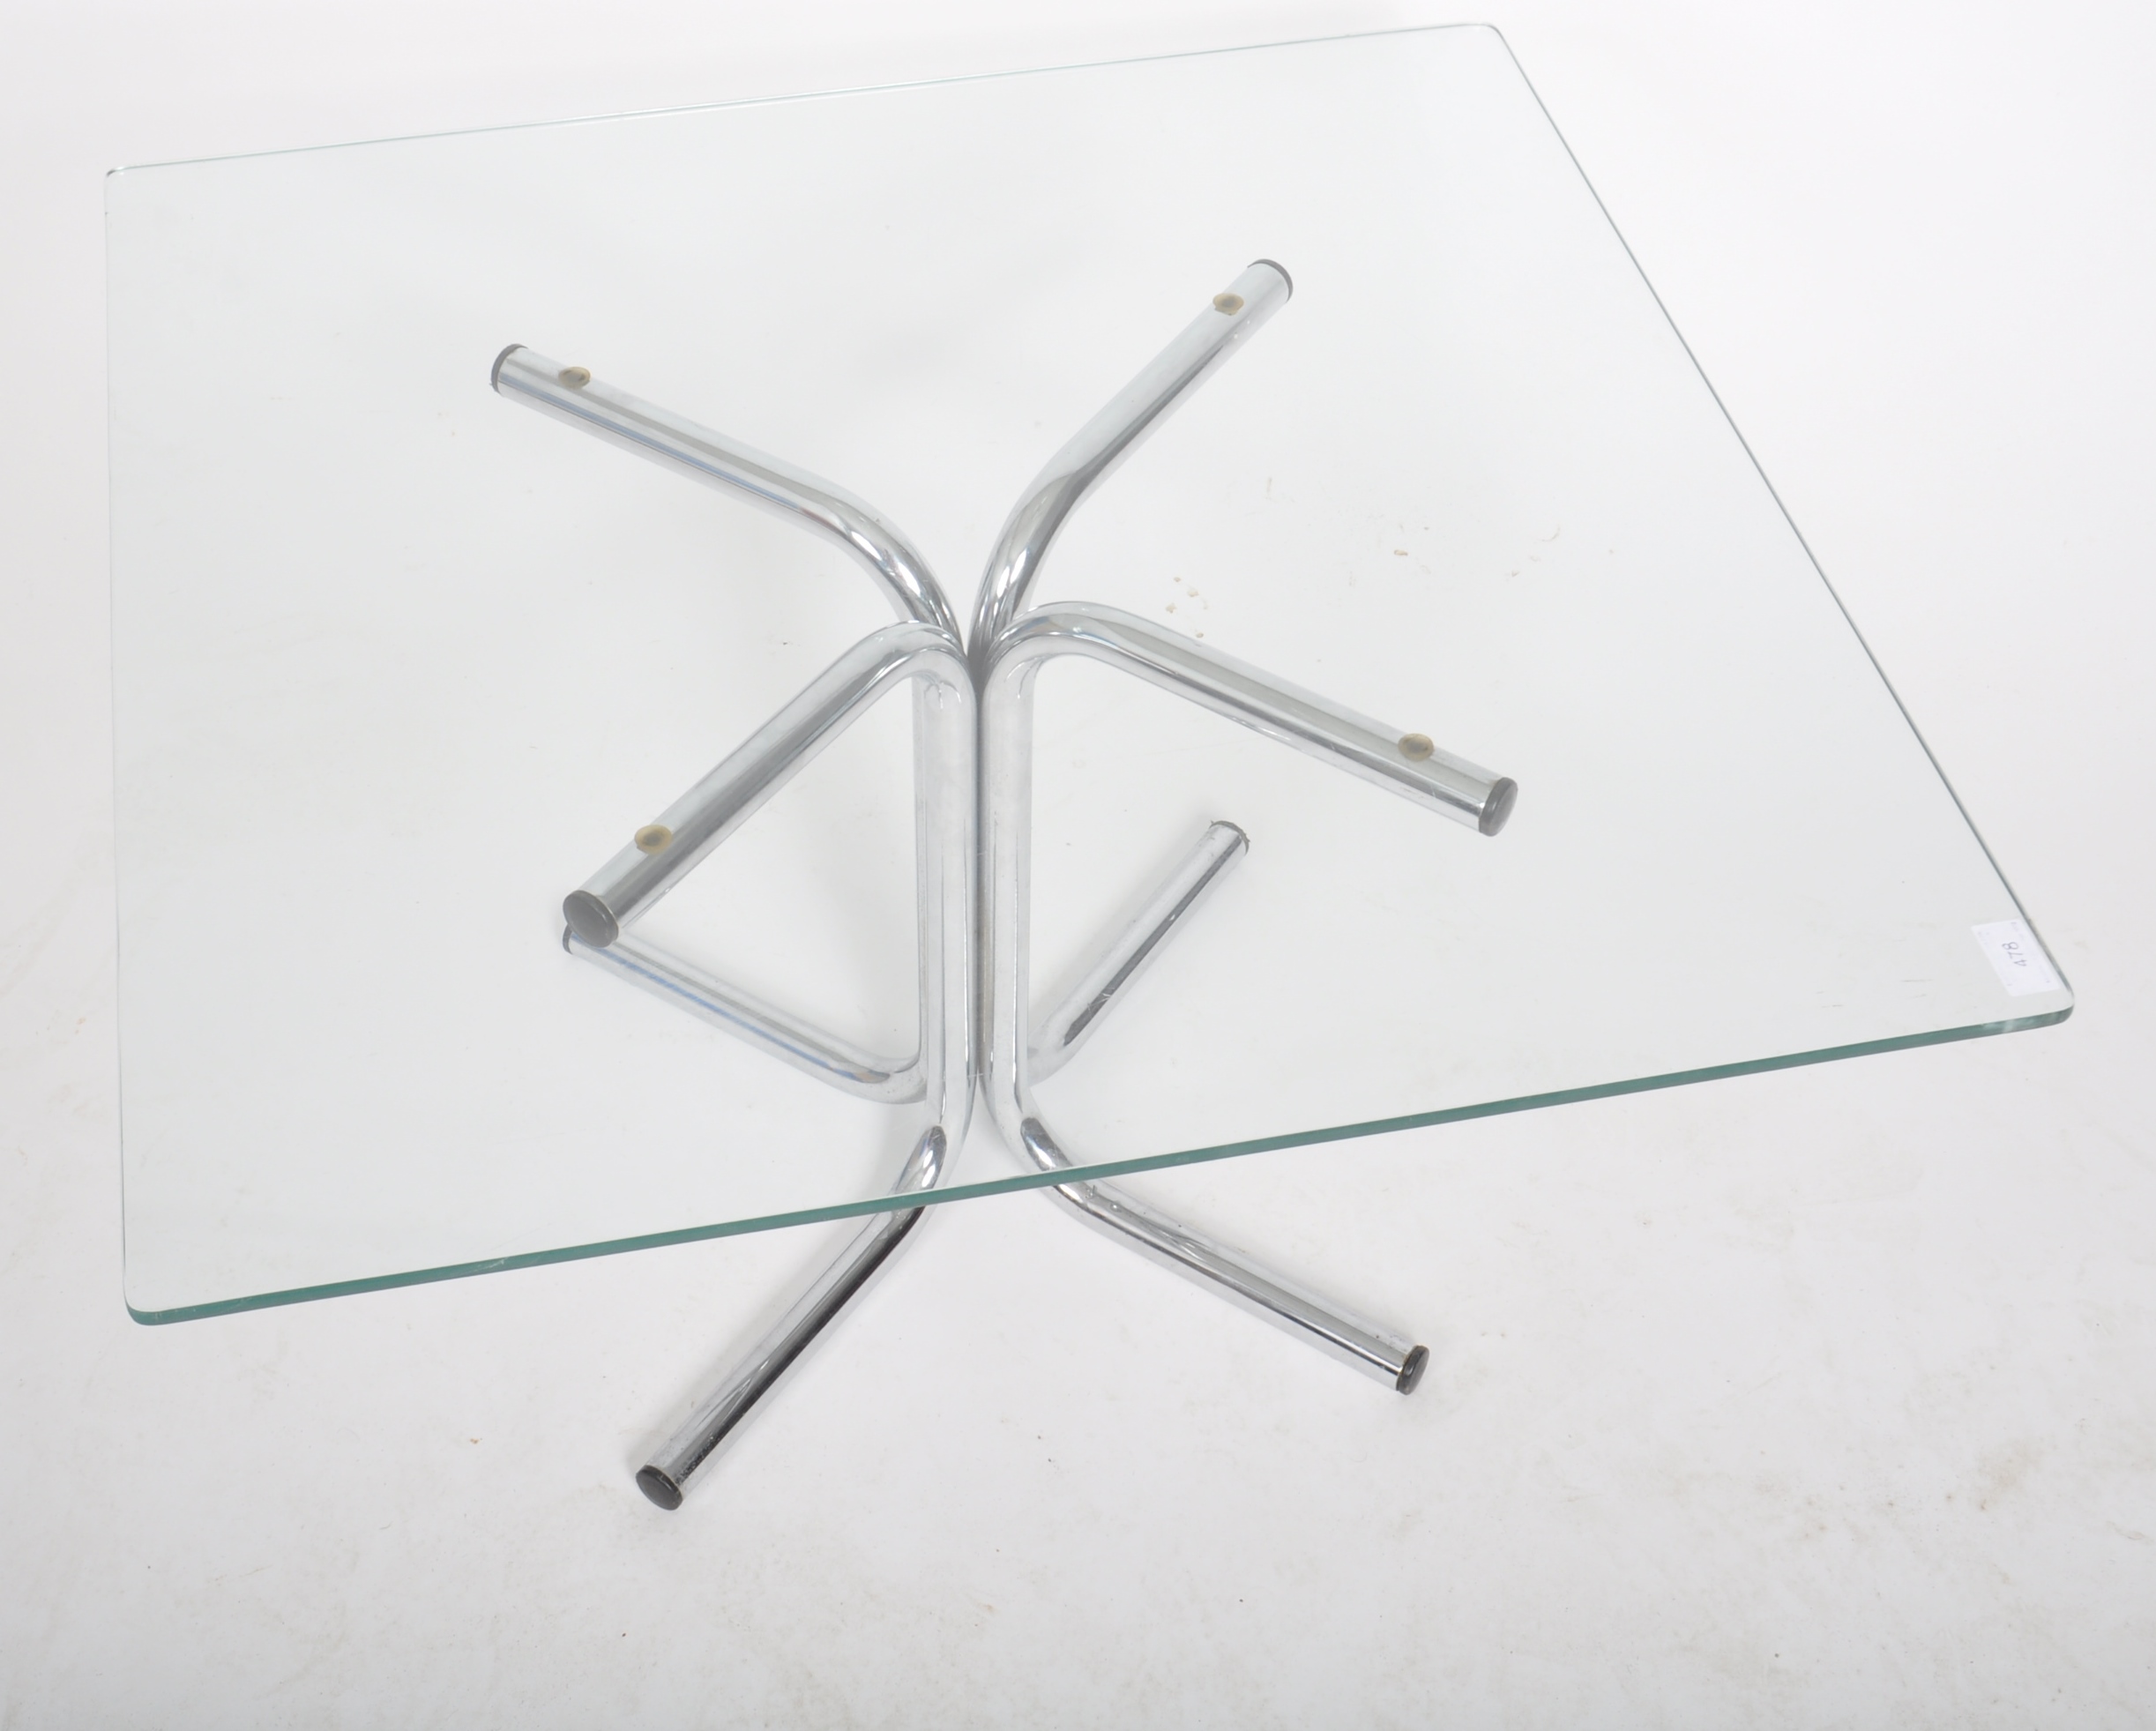 RETRO 20TH CENTURY 1980s CHROME AND GLASS COFFEE TABLE - Image 2 of 4